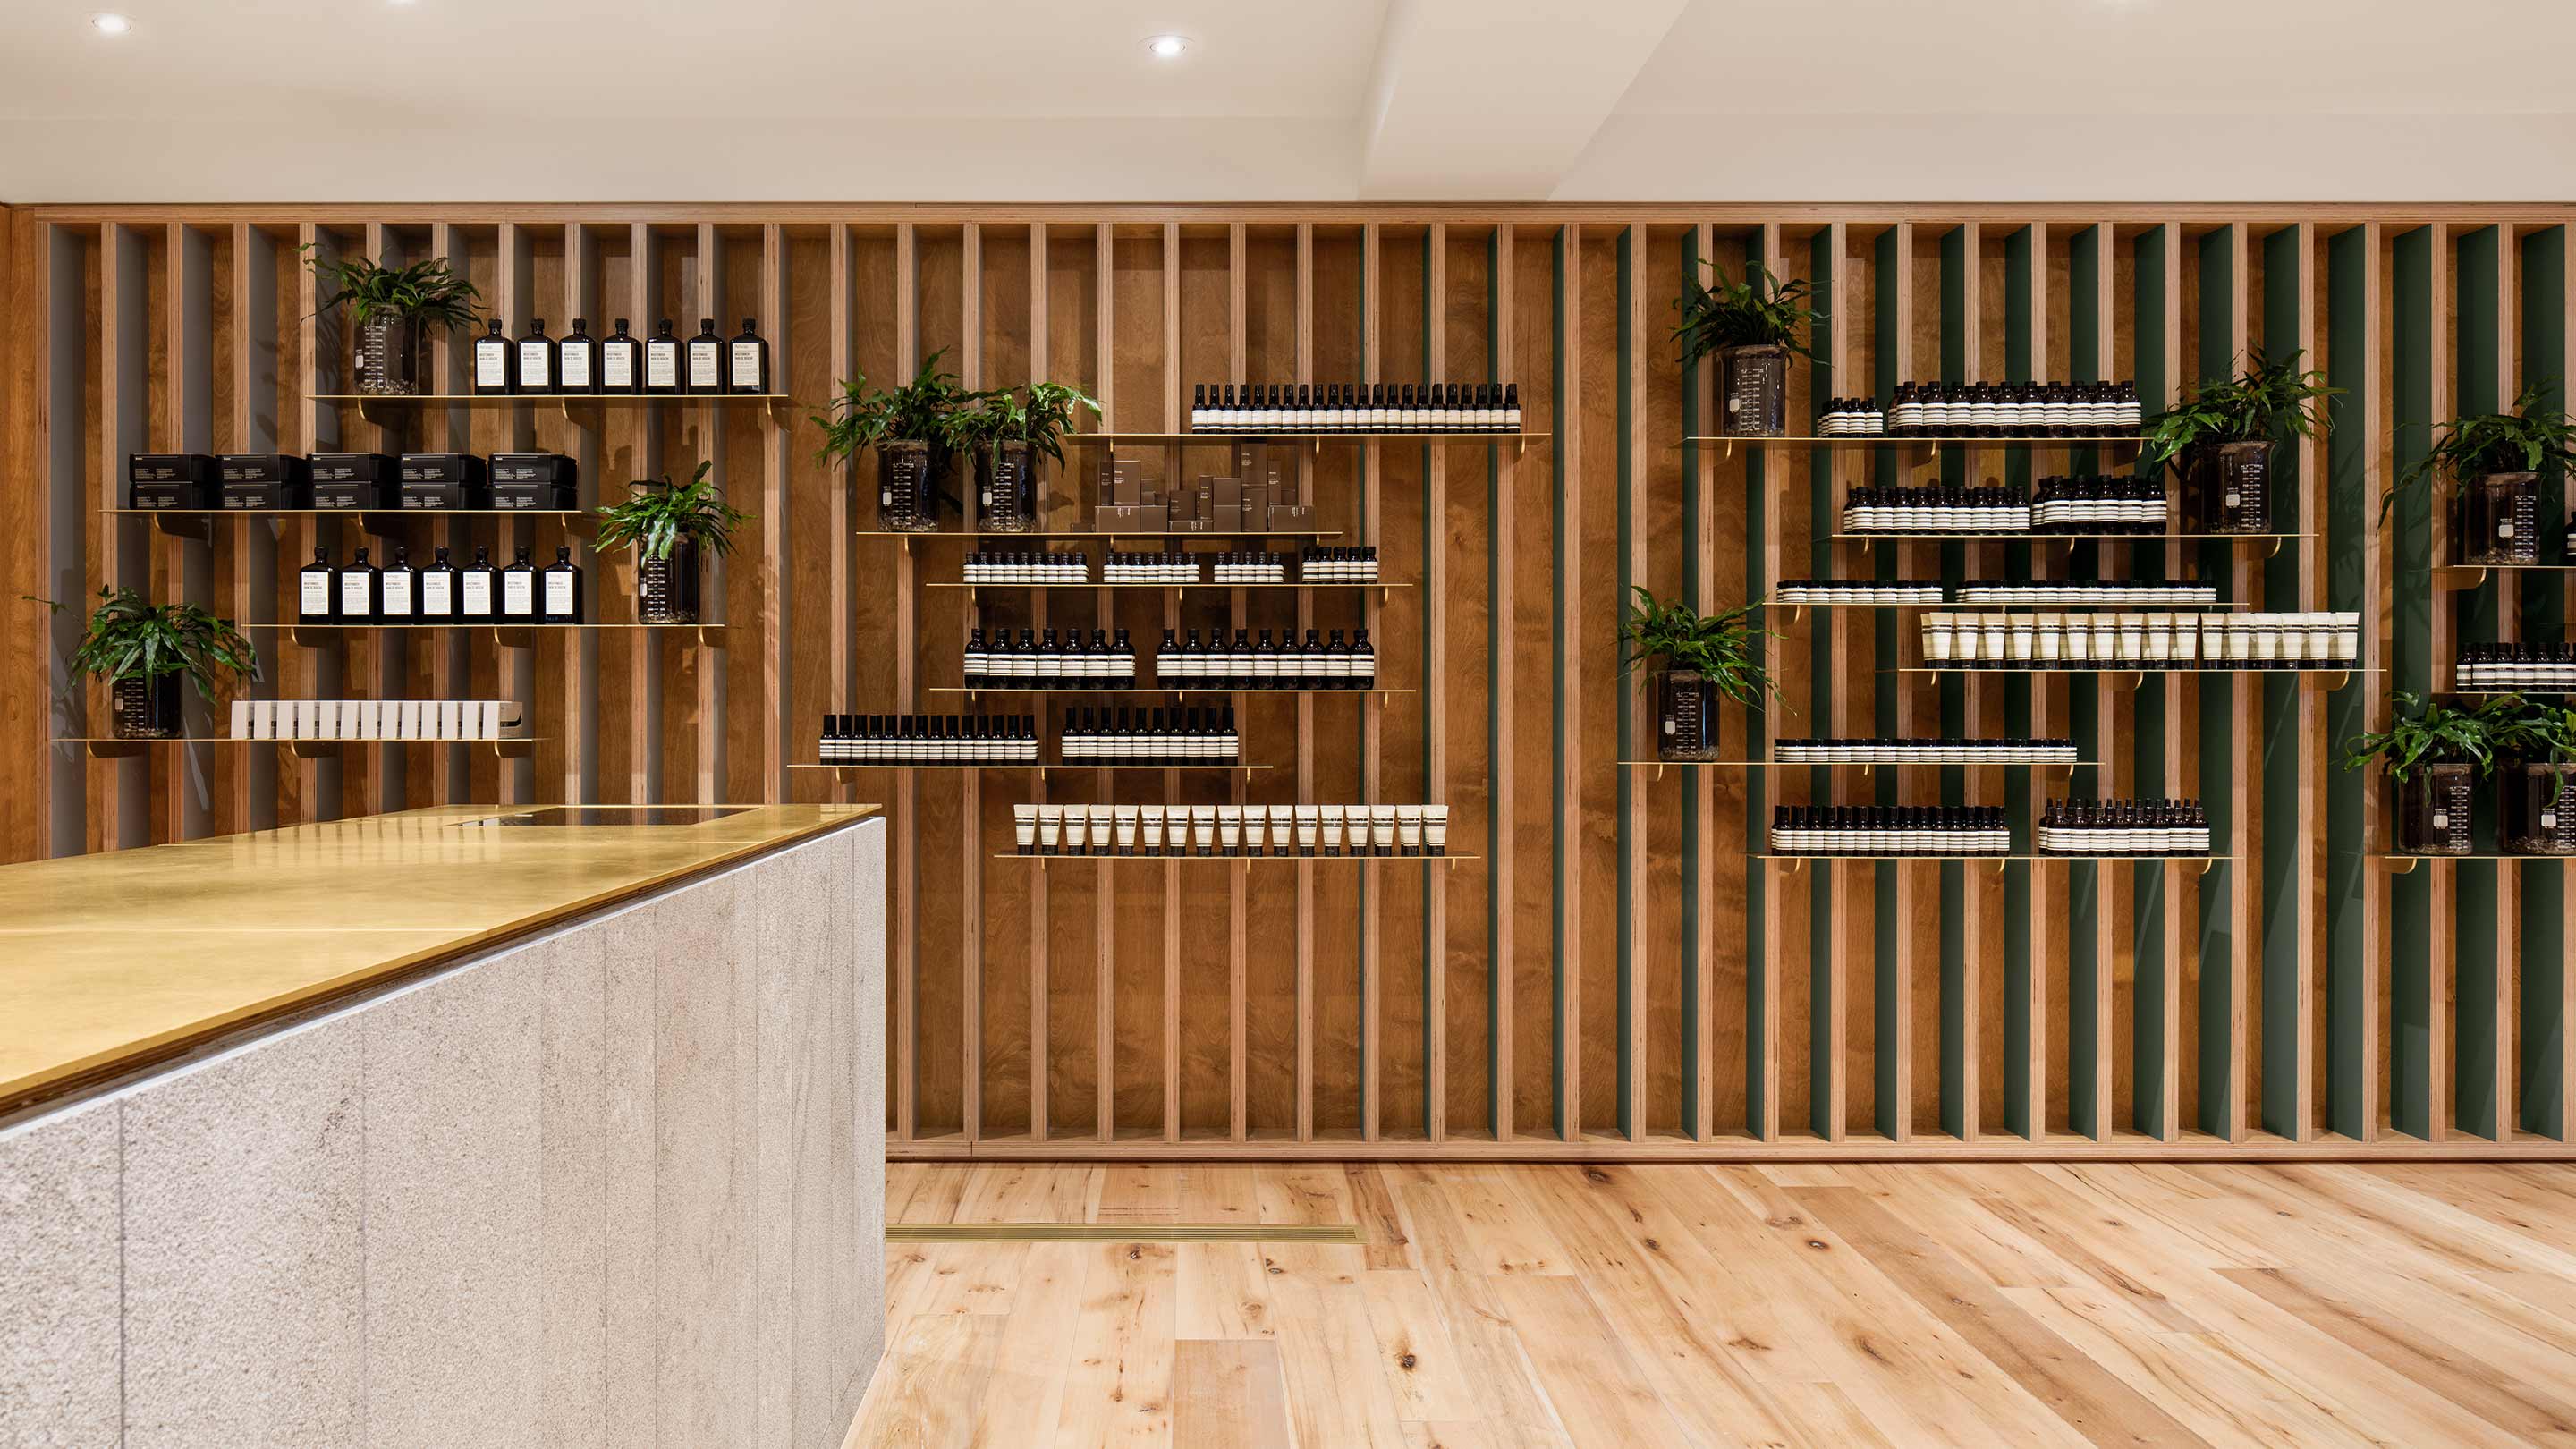 The stud wall fitted with a plywood structure comprising thin metal sheets that holds the Aesop Product Range that reveal contrasting colour of forest green and natural wood.